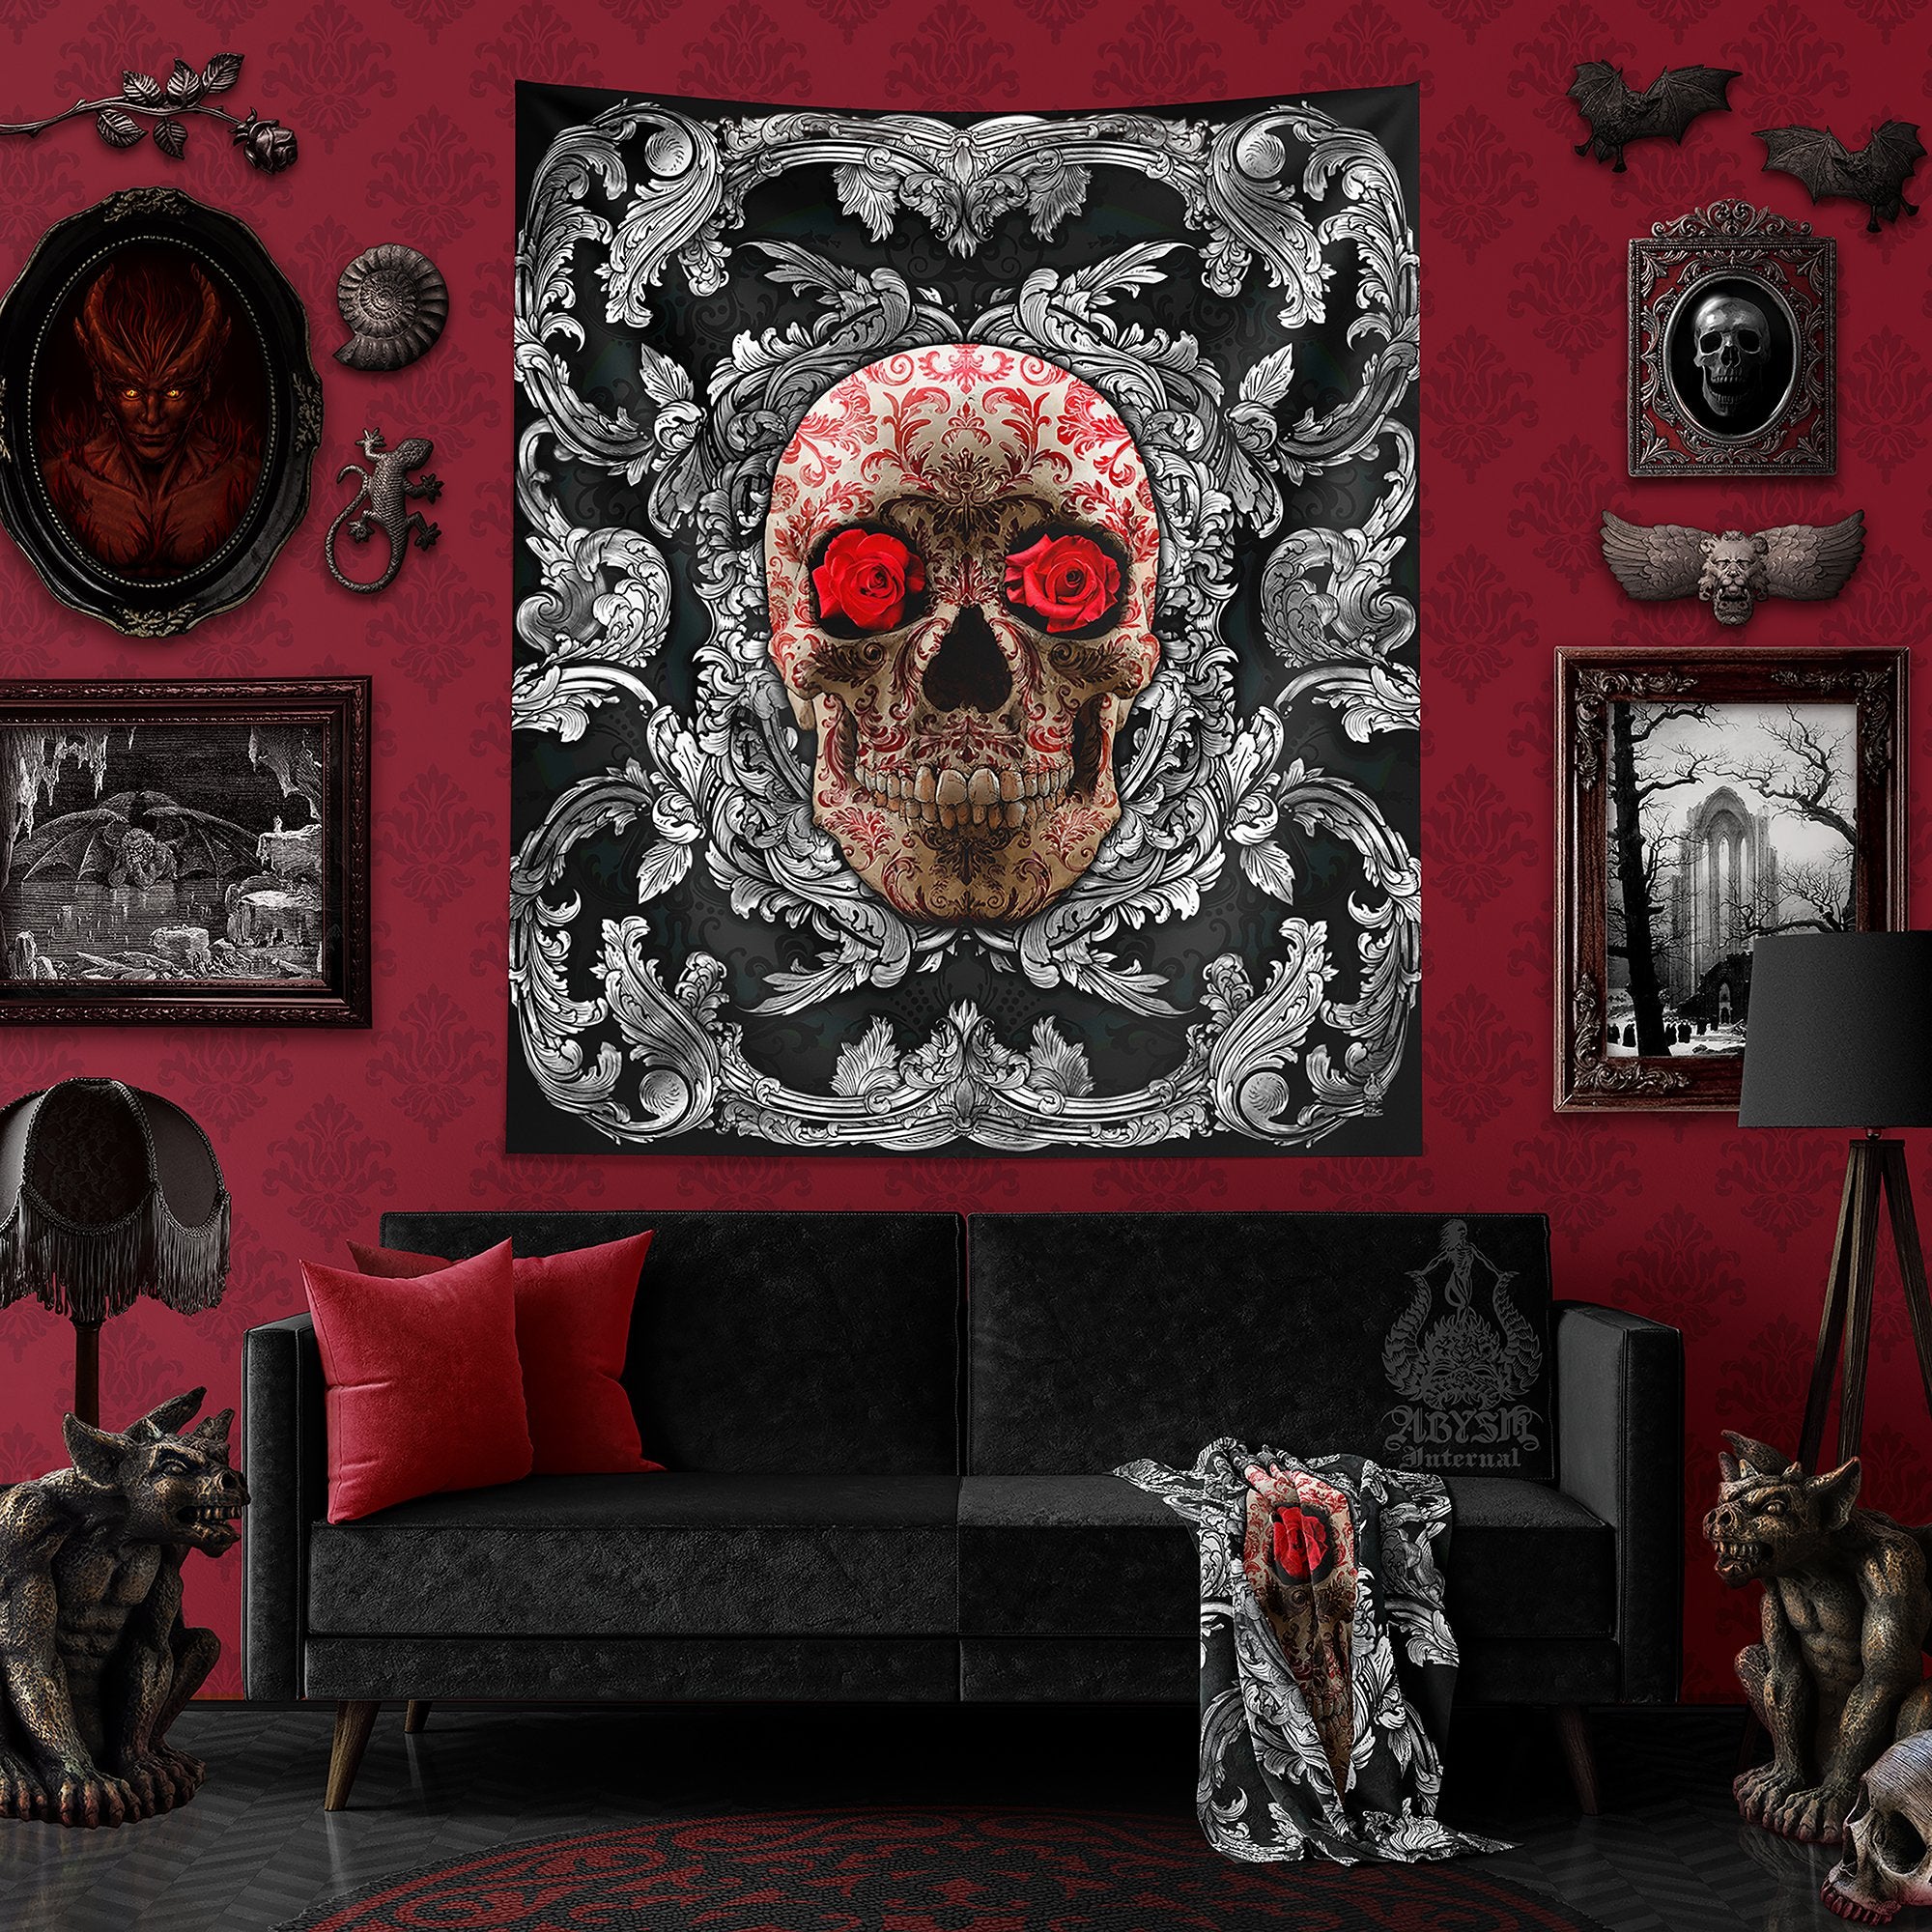 Silver Skull Tapestry, Macabre Wall Hanging, Goth Home Decor, Vertical Art Print - Diamonds and Roses, 2 versions - Abysm Internal